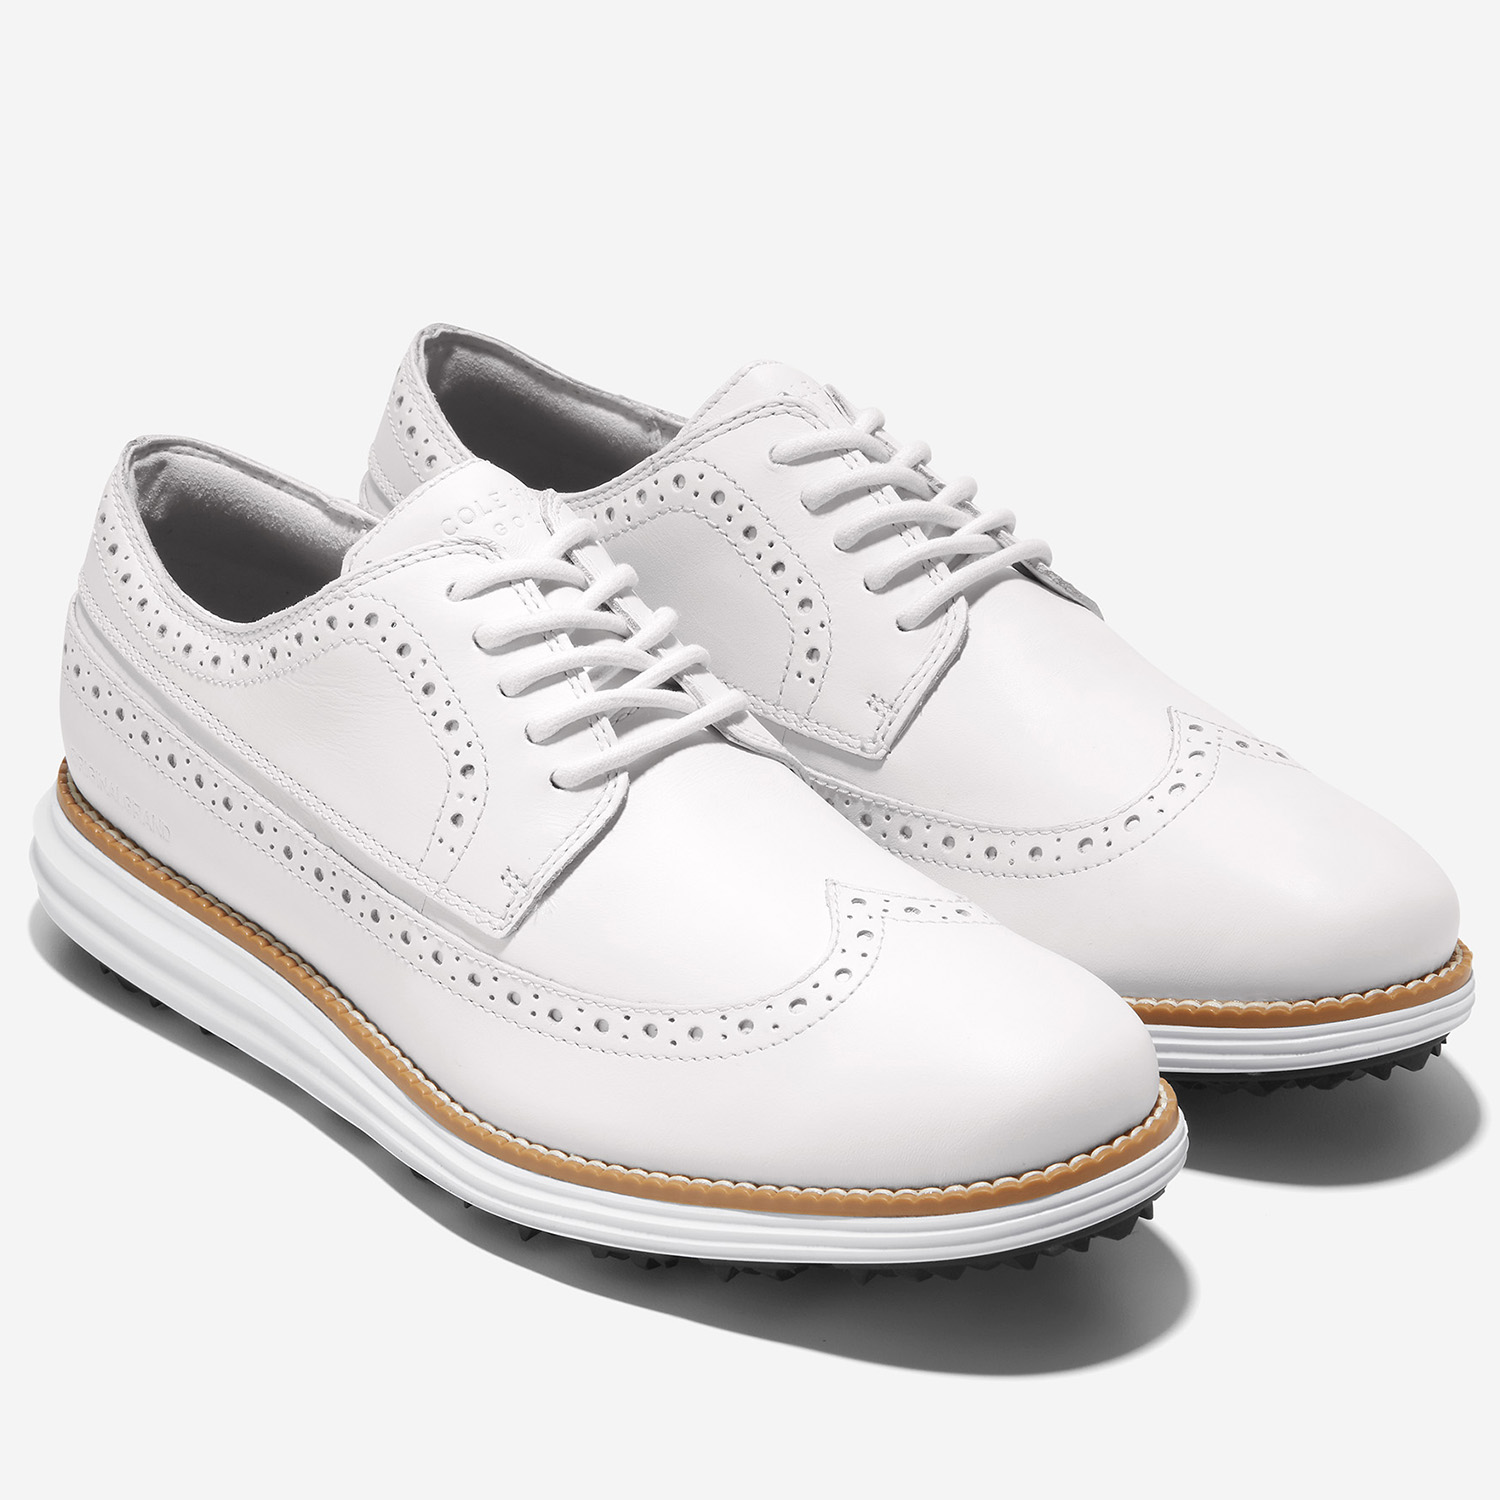 Cole Haan Original Grand Wing Ox Golf Shoes Optic White/Ch Natural ...